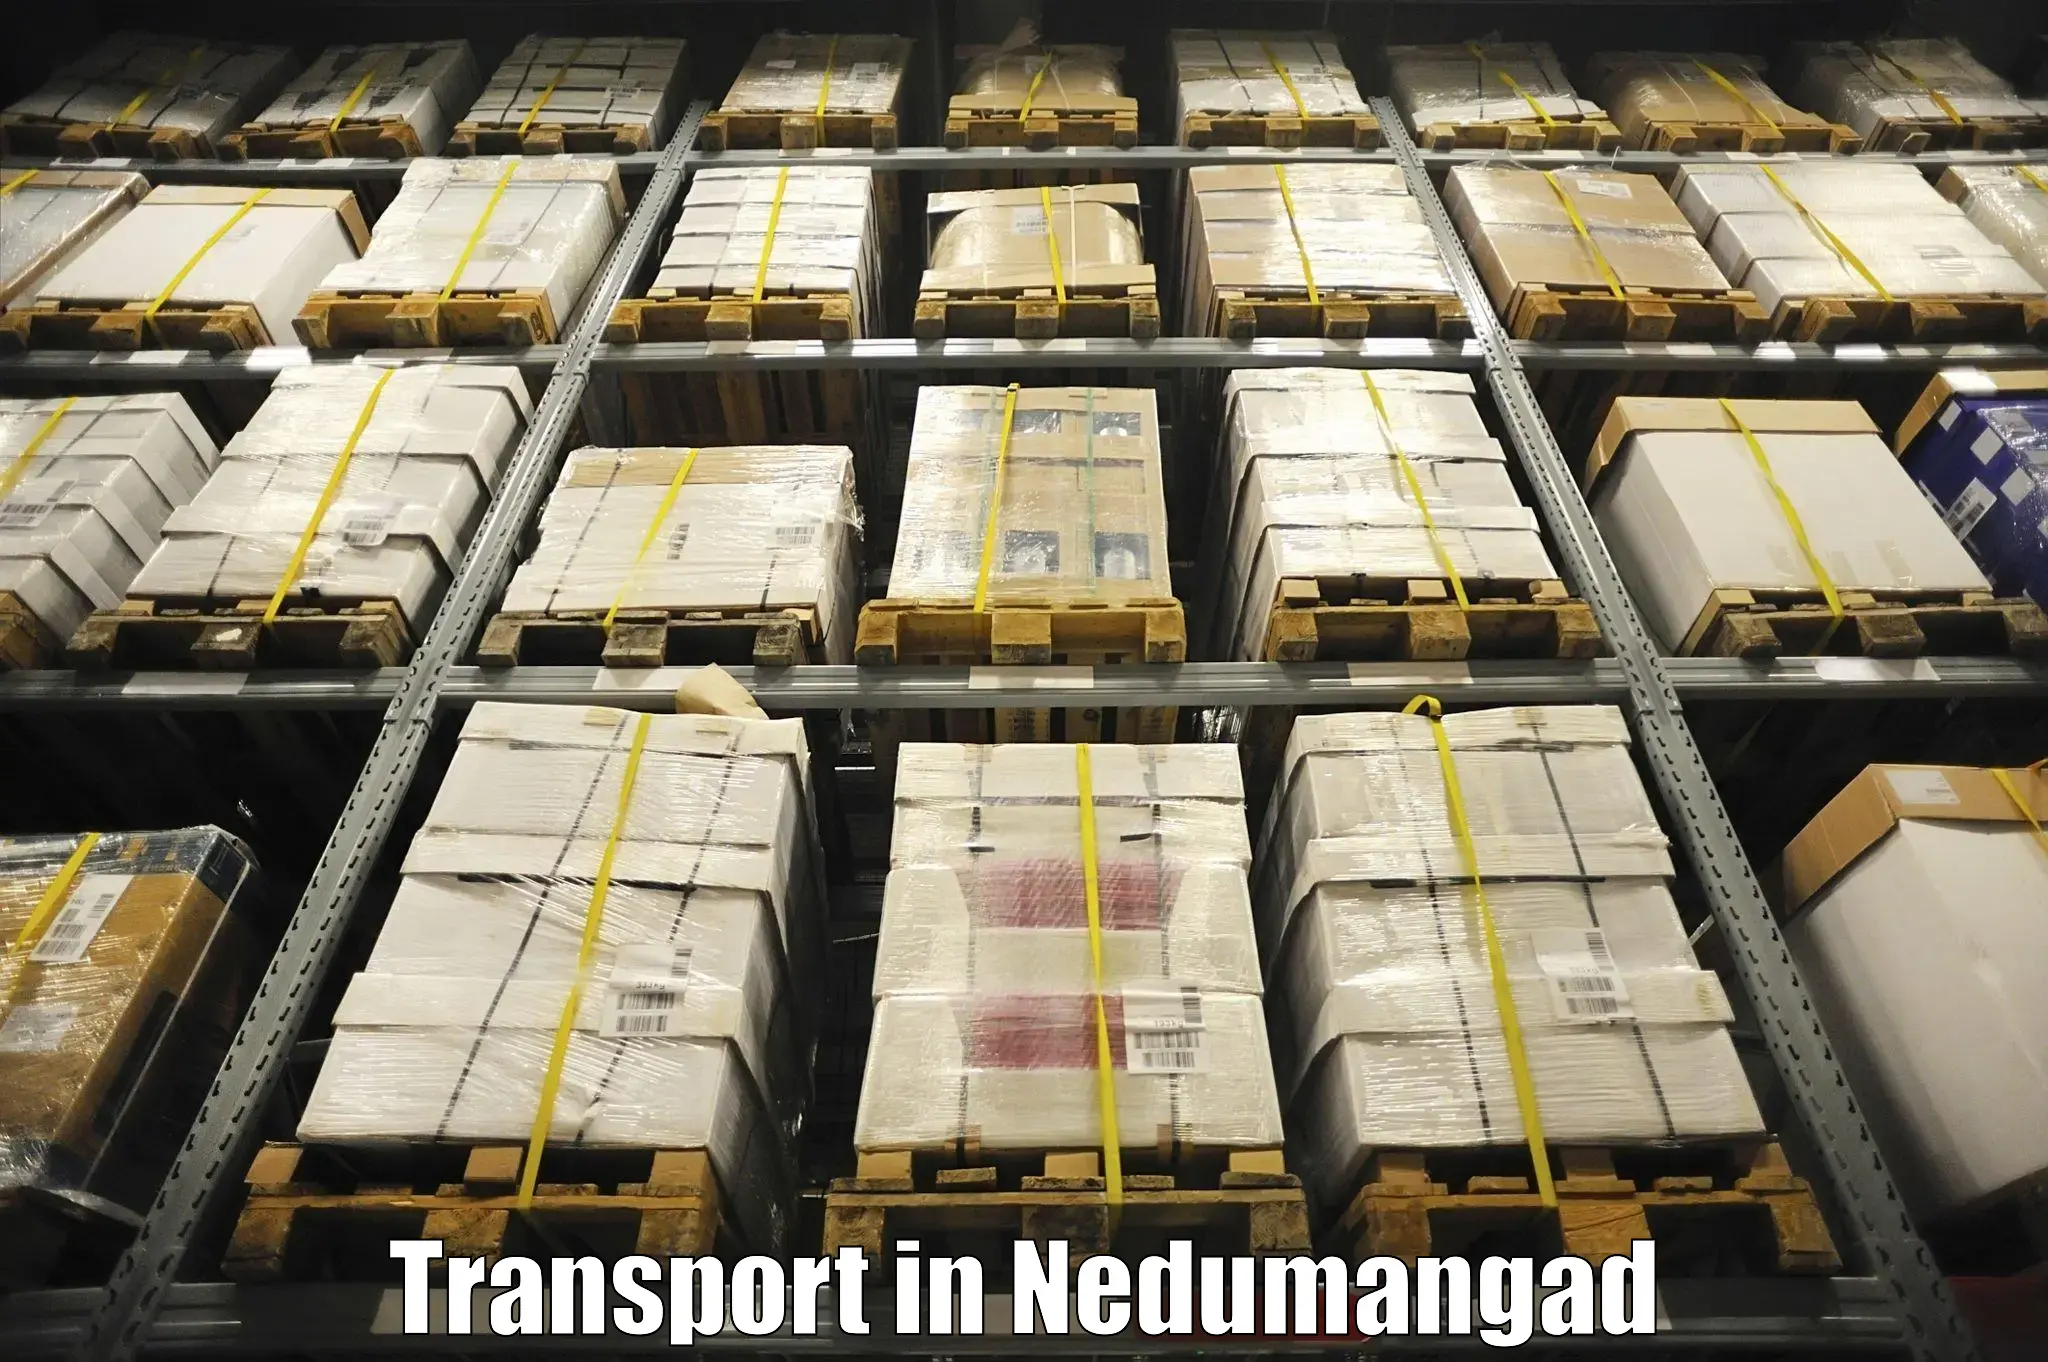 Vehicle courier services in Nedumangad